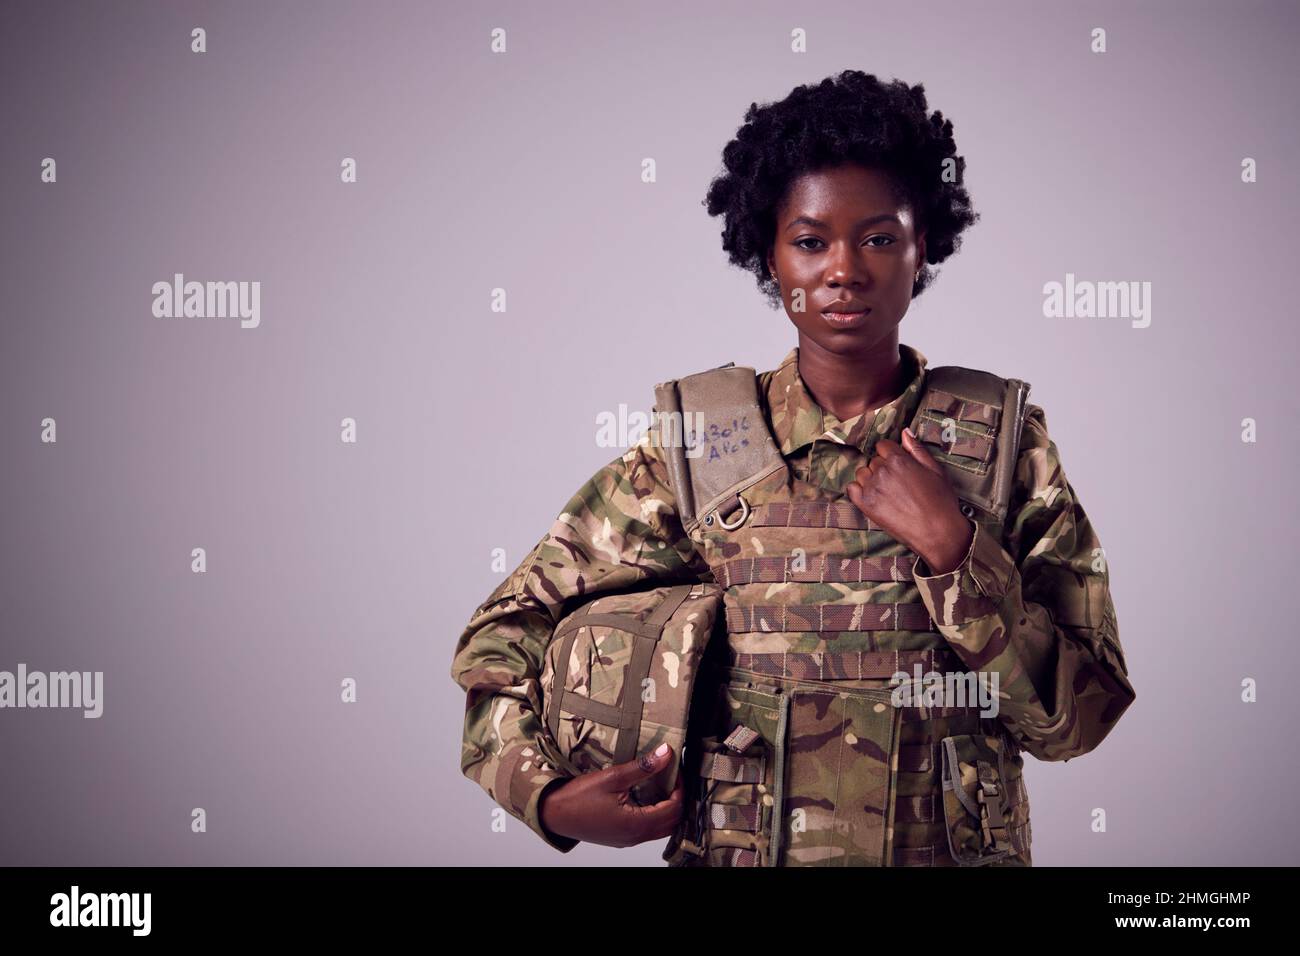 Studio Portrait Of Serious Young Female Soldier In Military Uniform Against Plain Background Stock Photo